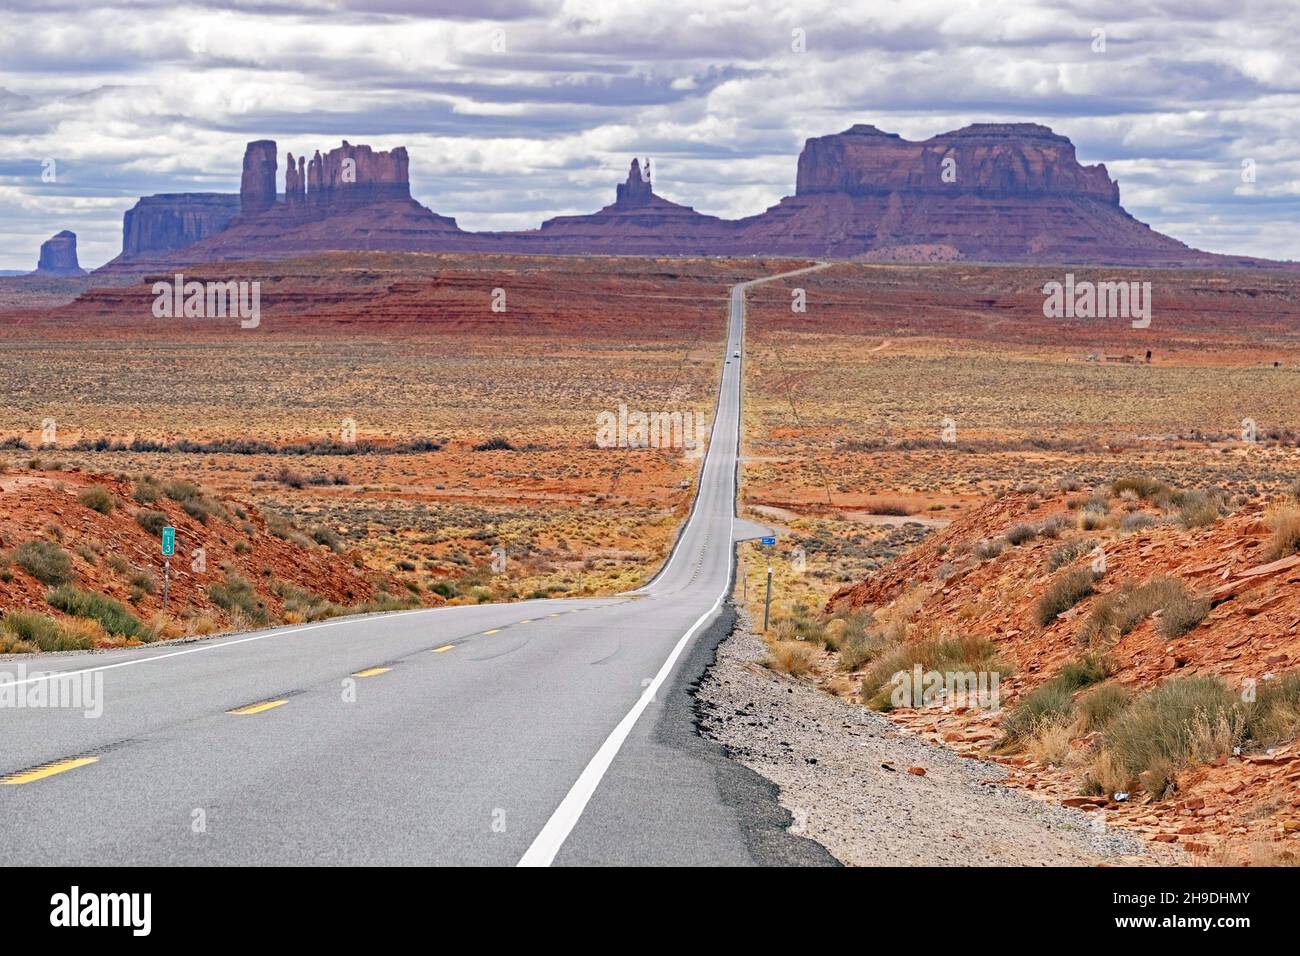 Forrest Gump Point / Forrest Gump Hill on Highway 163 Scenic Drive, straight road leading to Monument Valley, San Juan County, Utah, United States, US Stock Photo